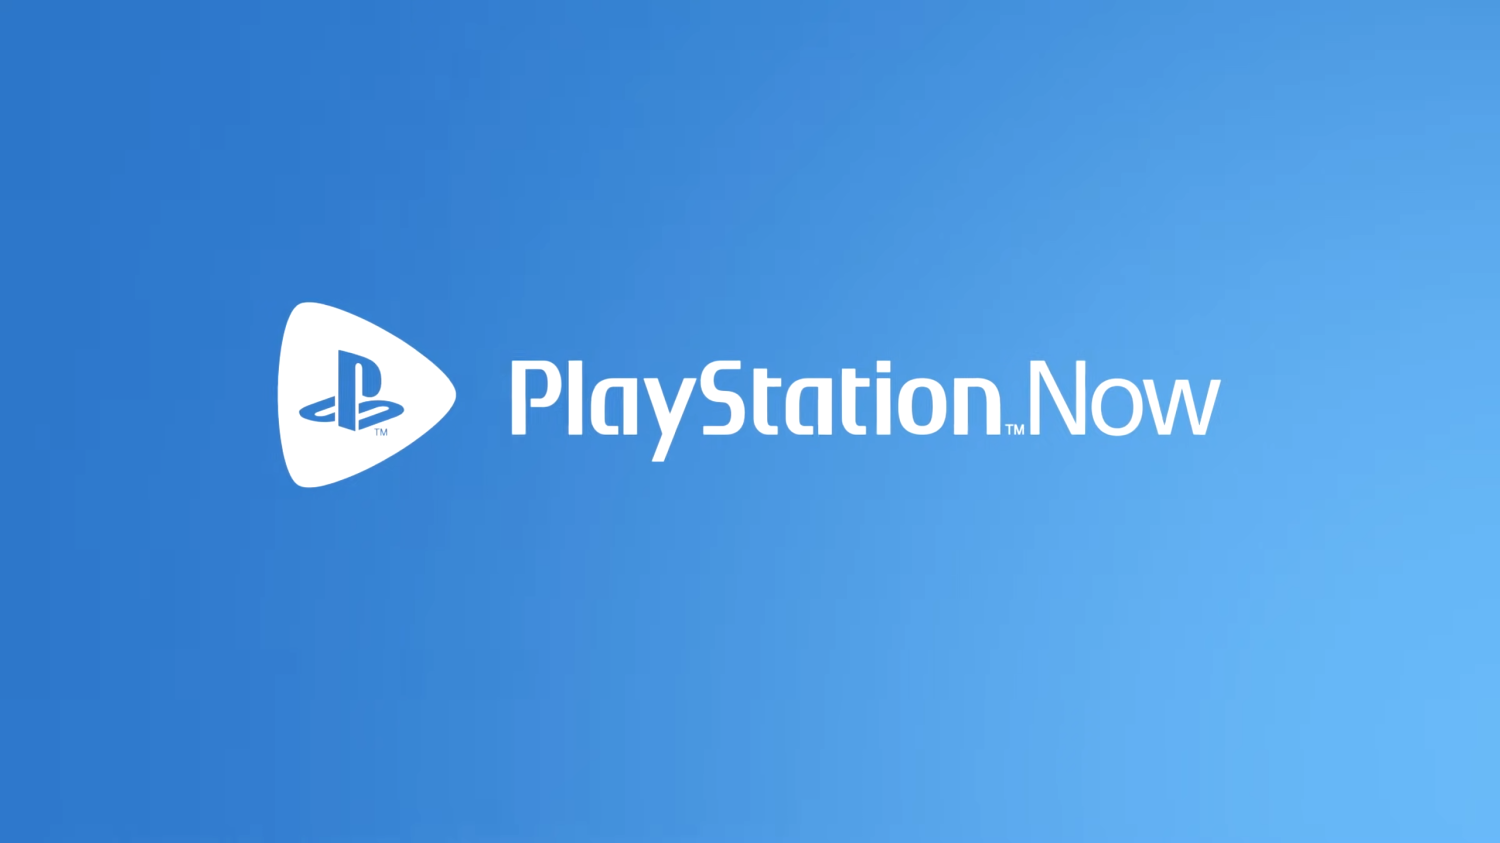 New PlayStation Plus: 740 games across six generations for $119 a year